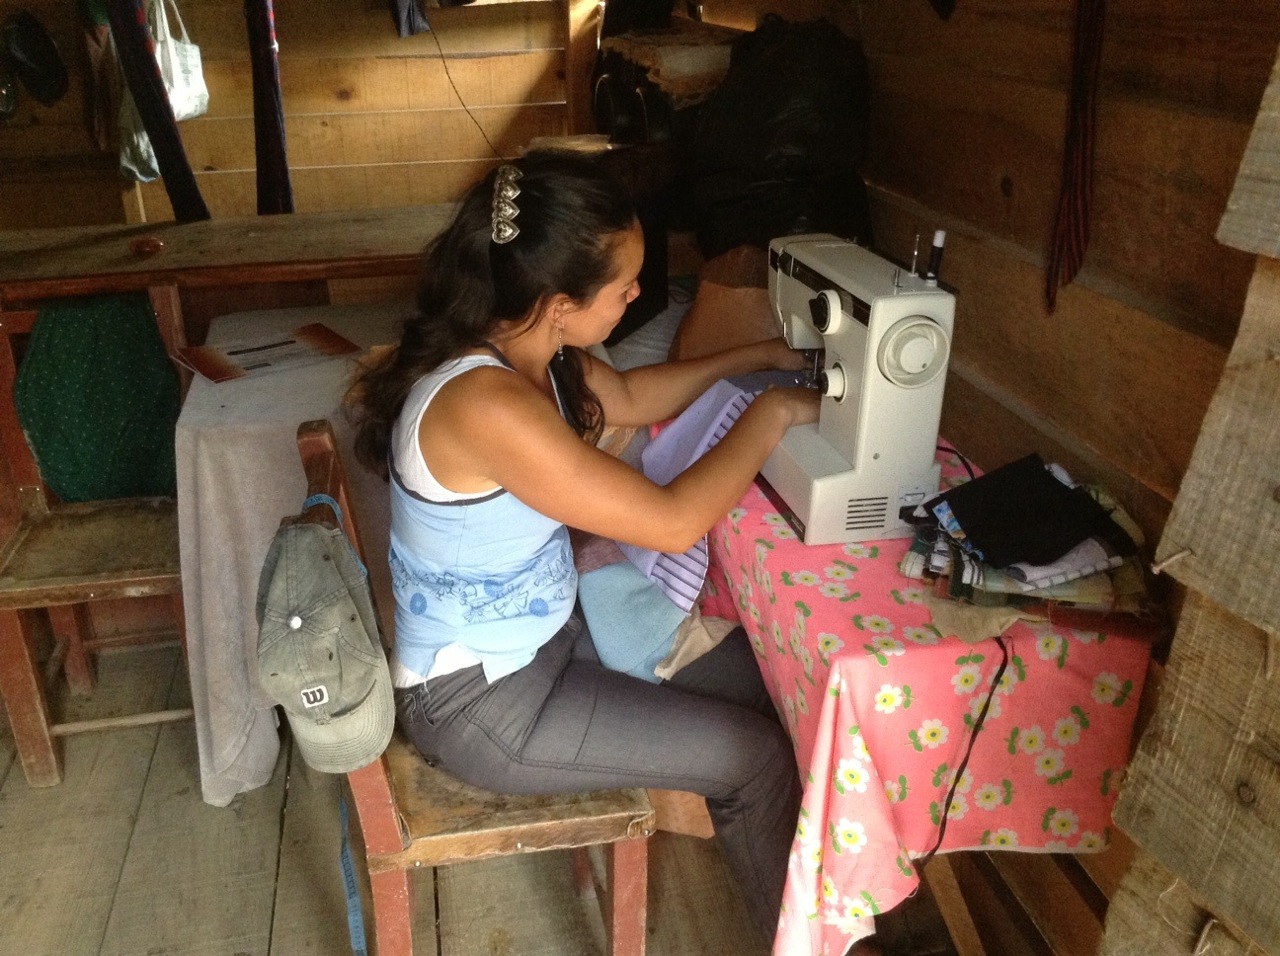  Glenda at work in her home business. 